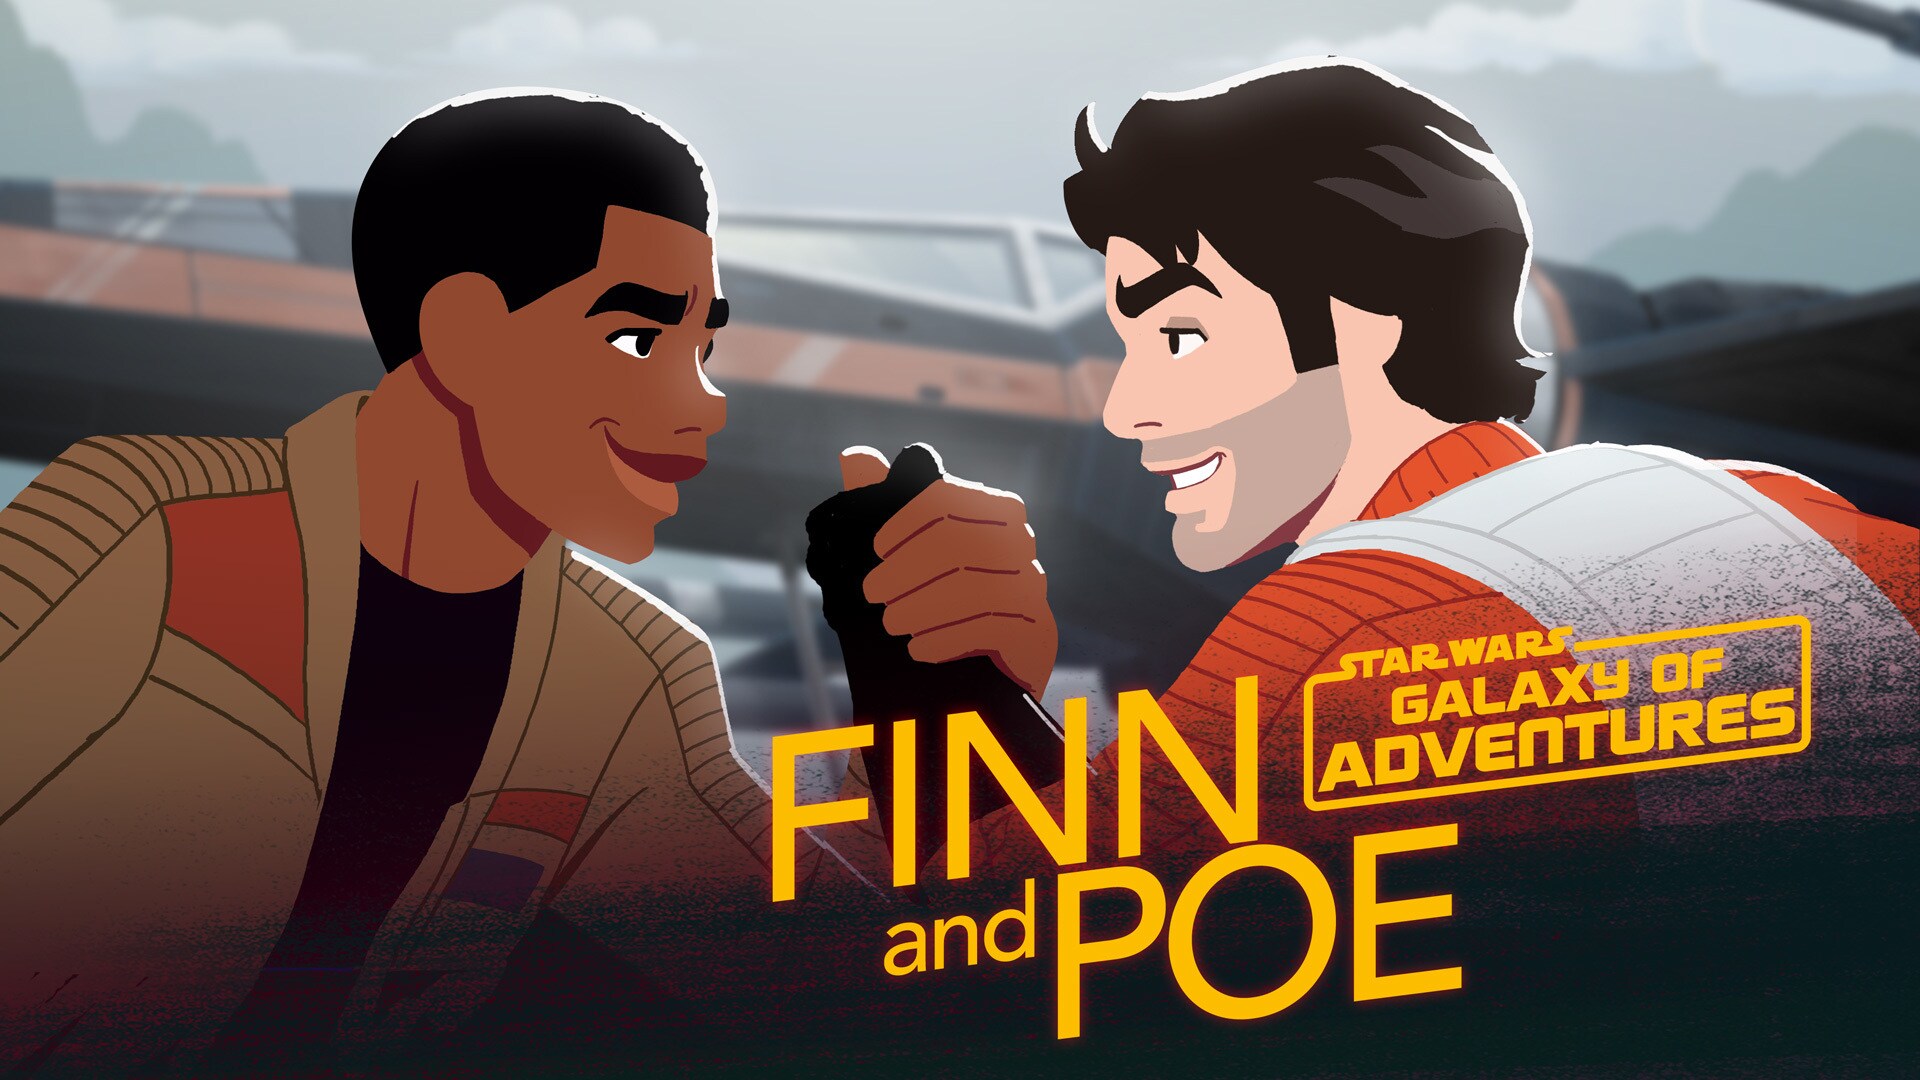 An Unlikely Friendship | Star Wars Galaxy of Adventures